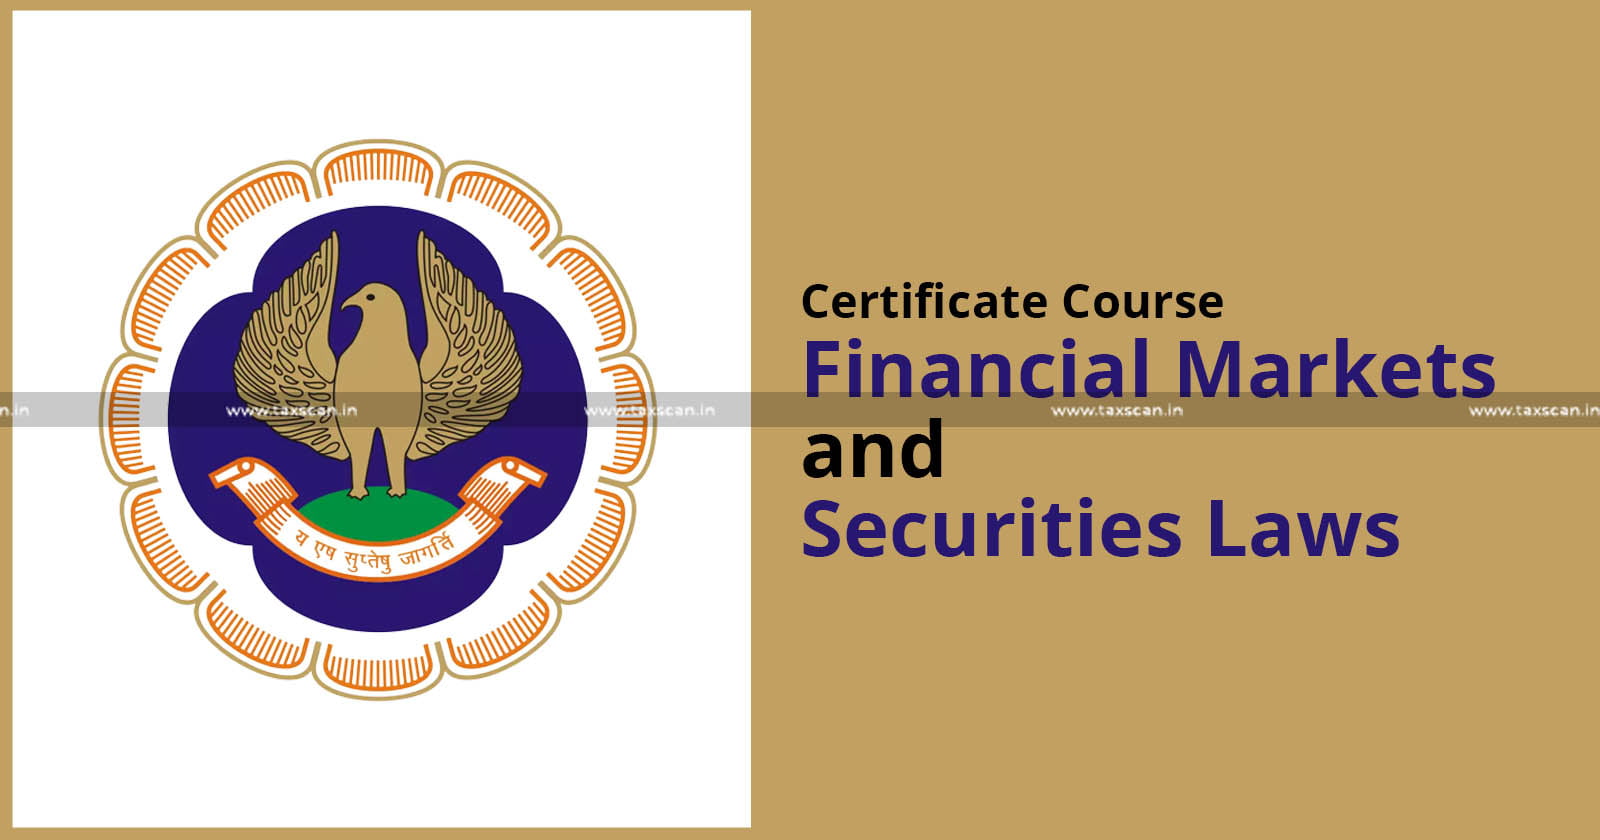 Online - Assessment - Test - Certificate - Course - Financial - Markets - Securities - Laws - ICAI - TAXSCAN